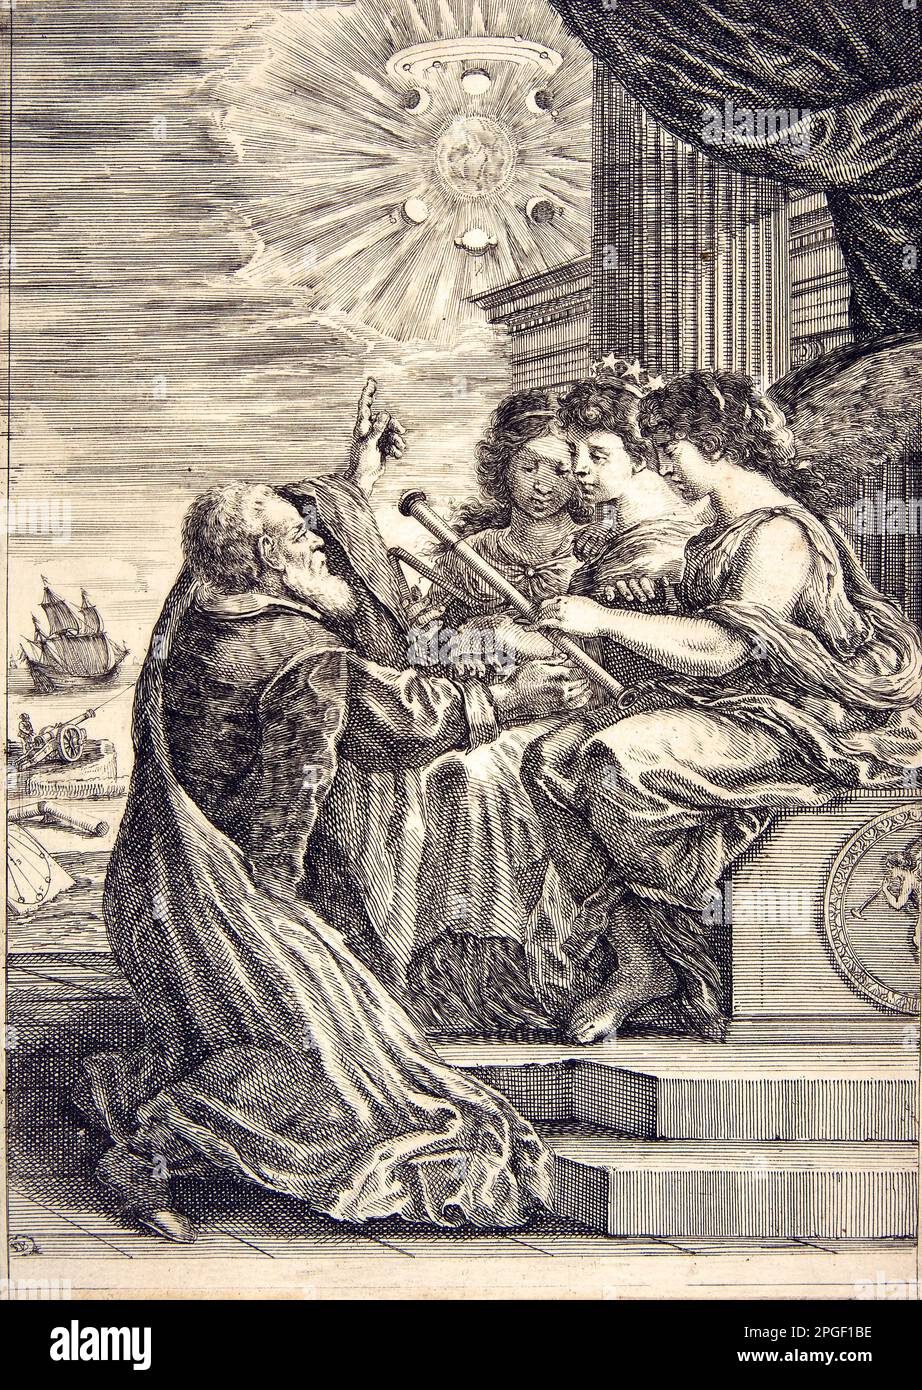 Galileo and personifications of Astronomy, Perspective and Mathematics, frontispiece for 'Opere di Galileo Galilei' by Stefano della Bella  Author Galileo Galilei  1656 Stock Photo